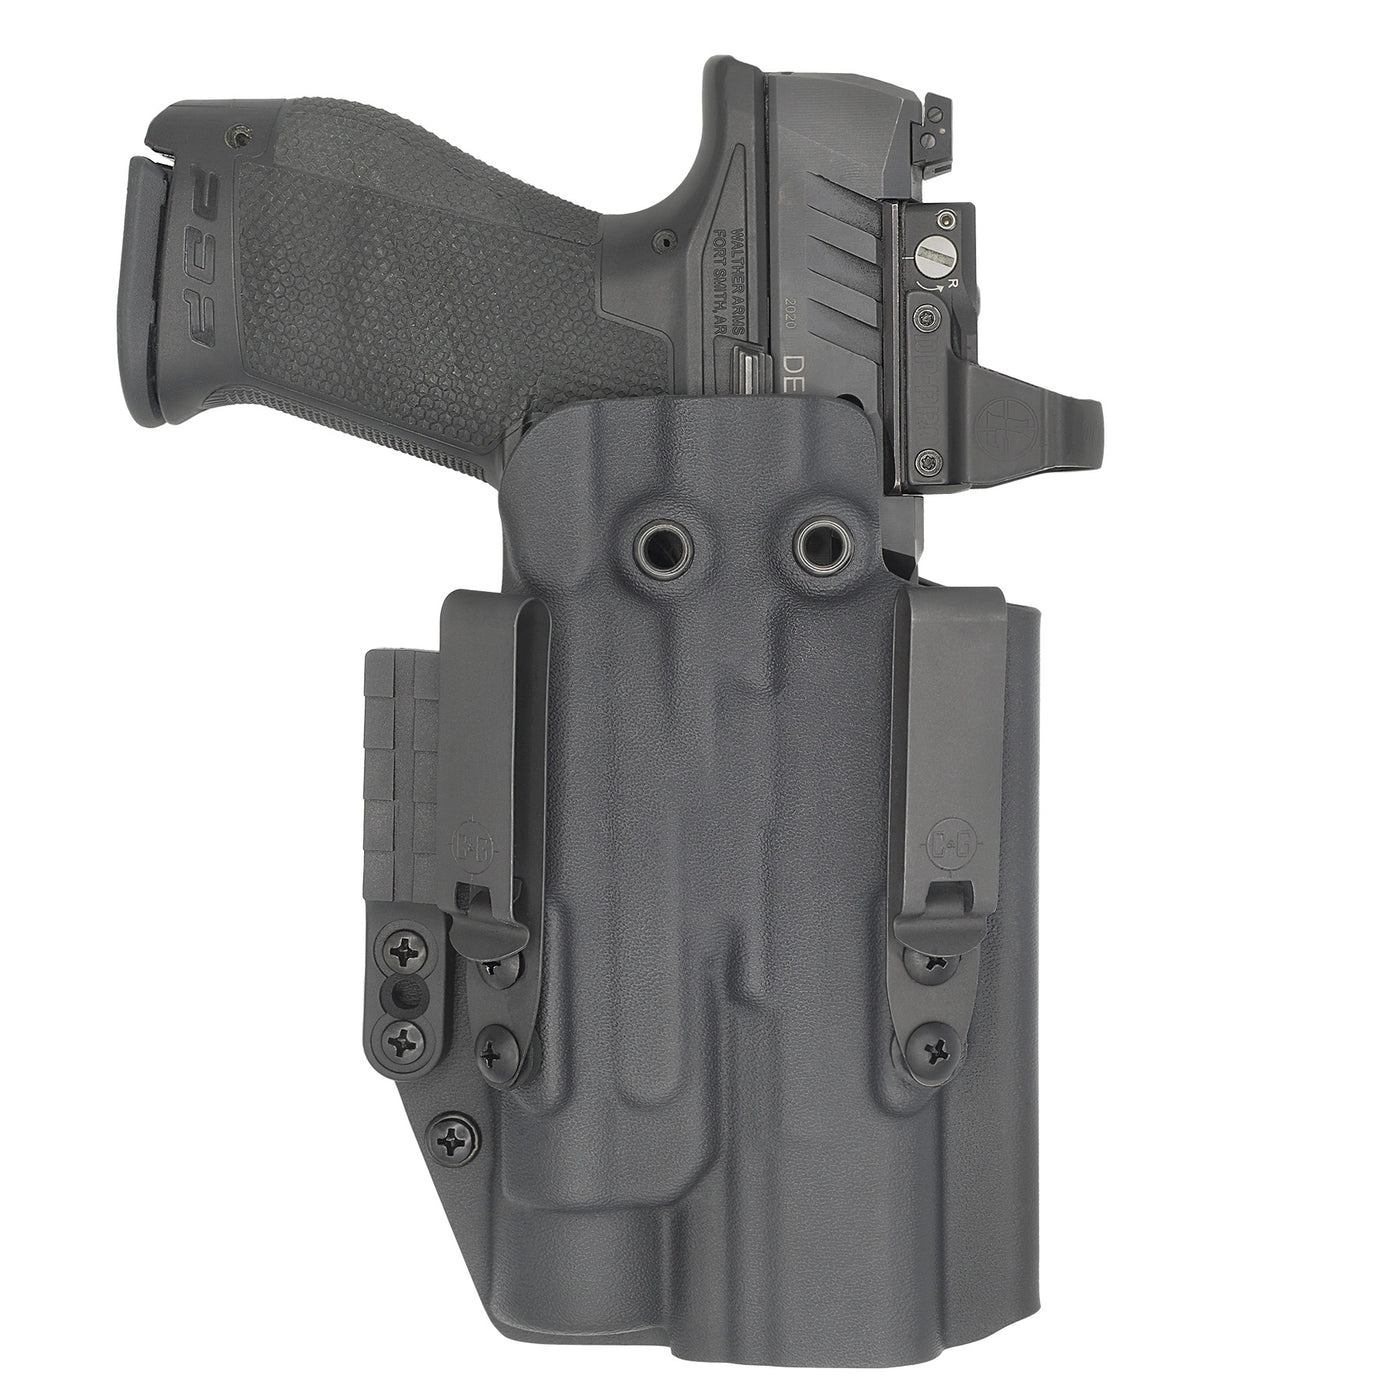 C&G Holsters quickship IWB Tactical ALPHA UPGRADE CZ Shadow 2 Streamight TLR1 in holstered position